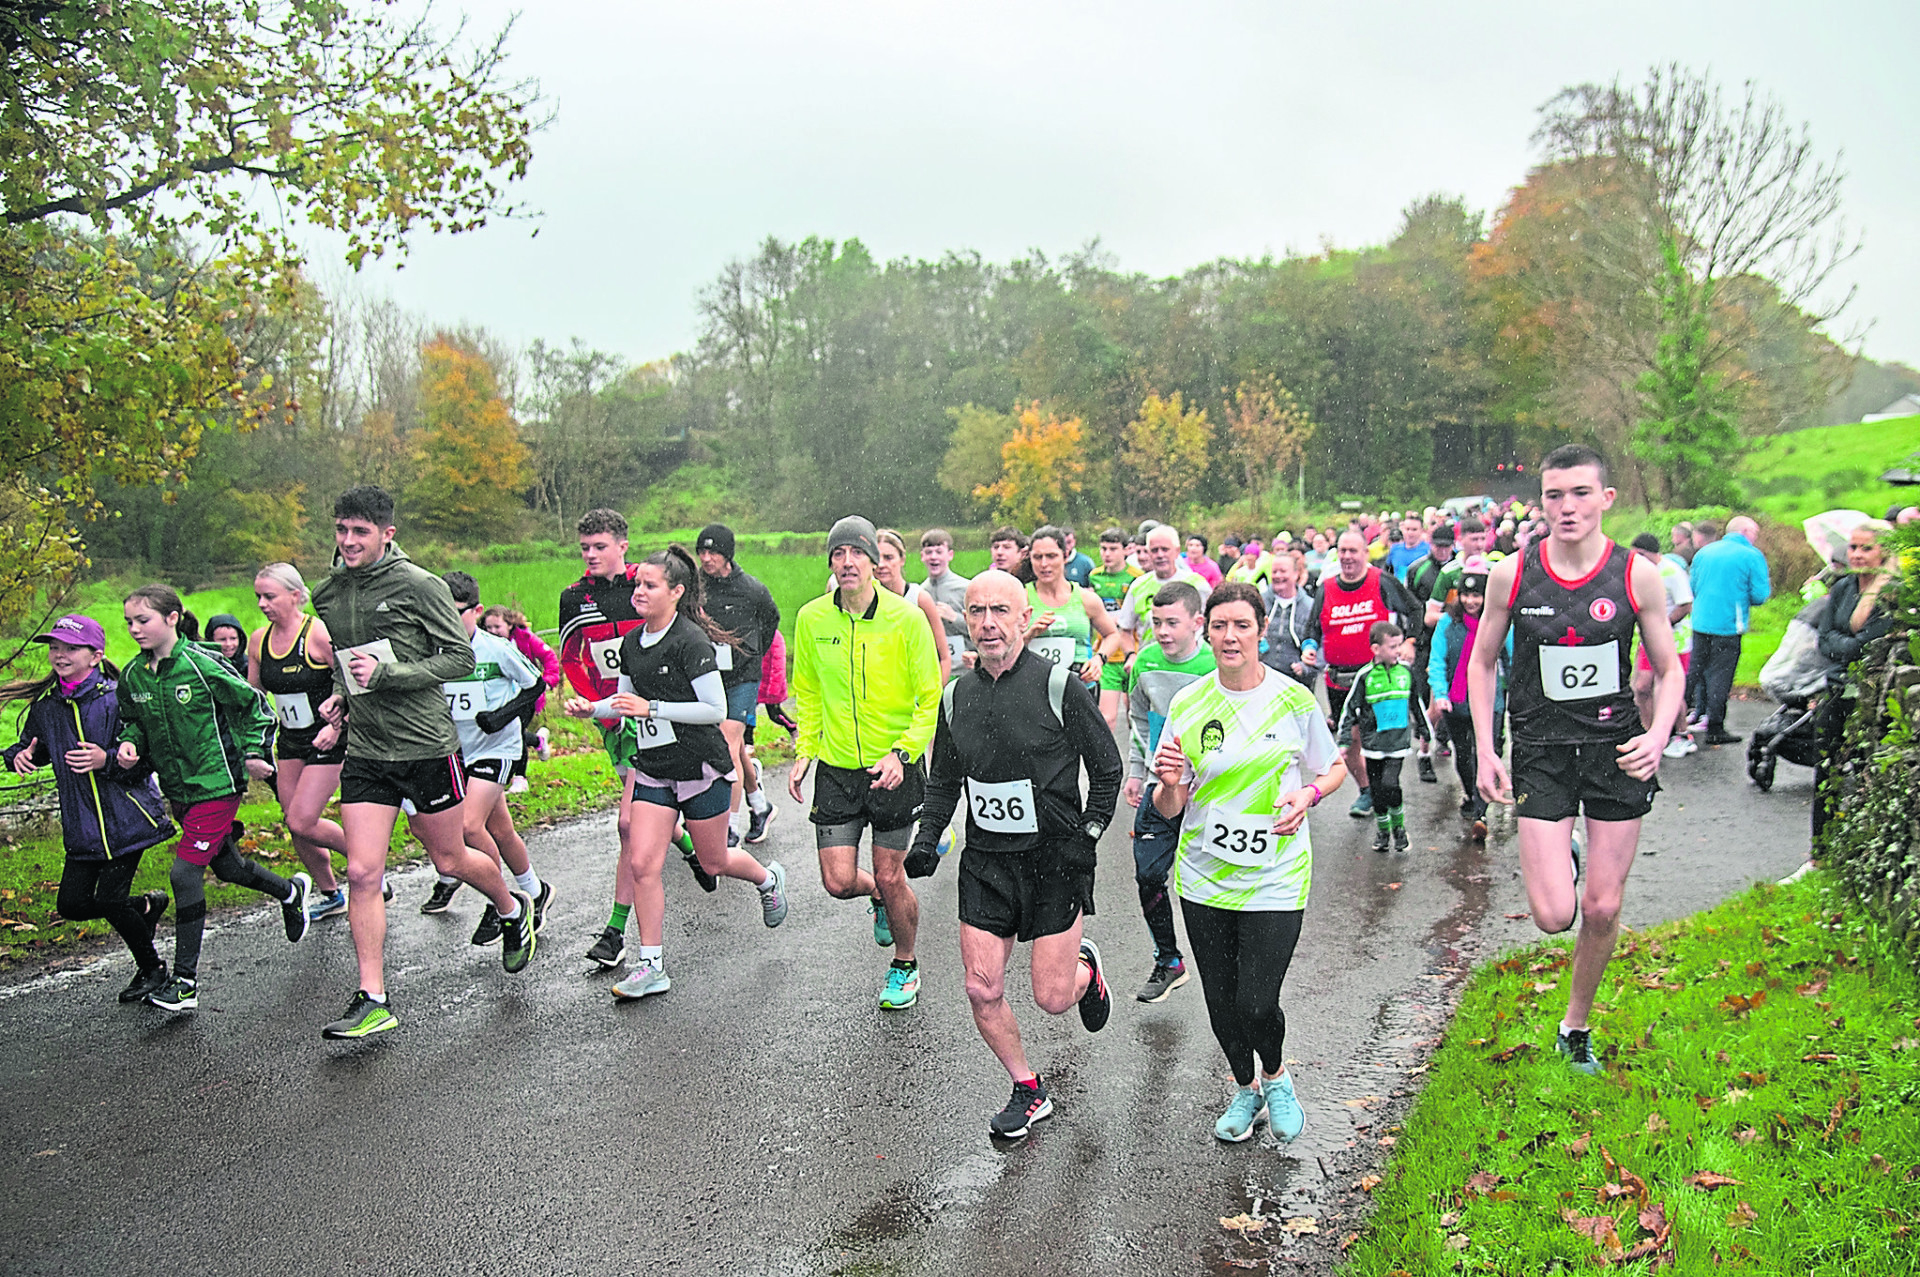 Runners out in force at Drumragh races